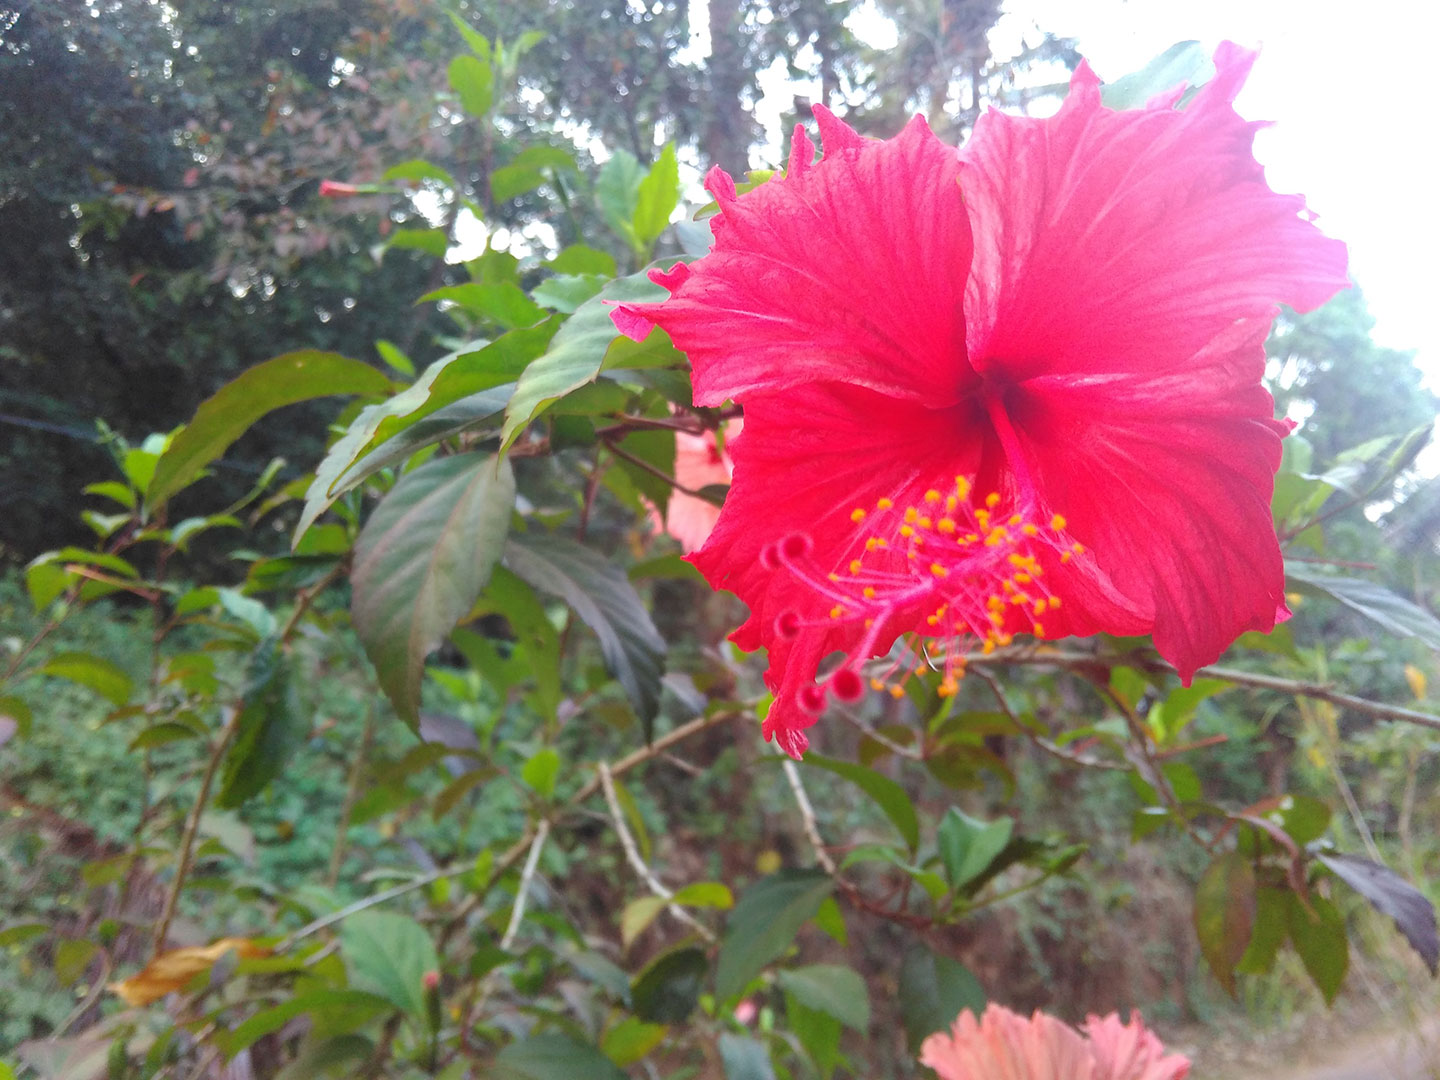 A large Hibiscus plant